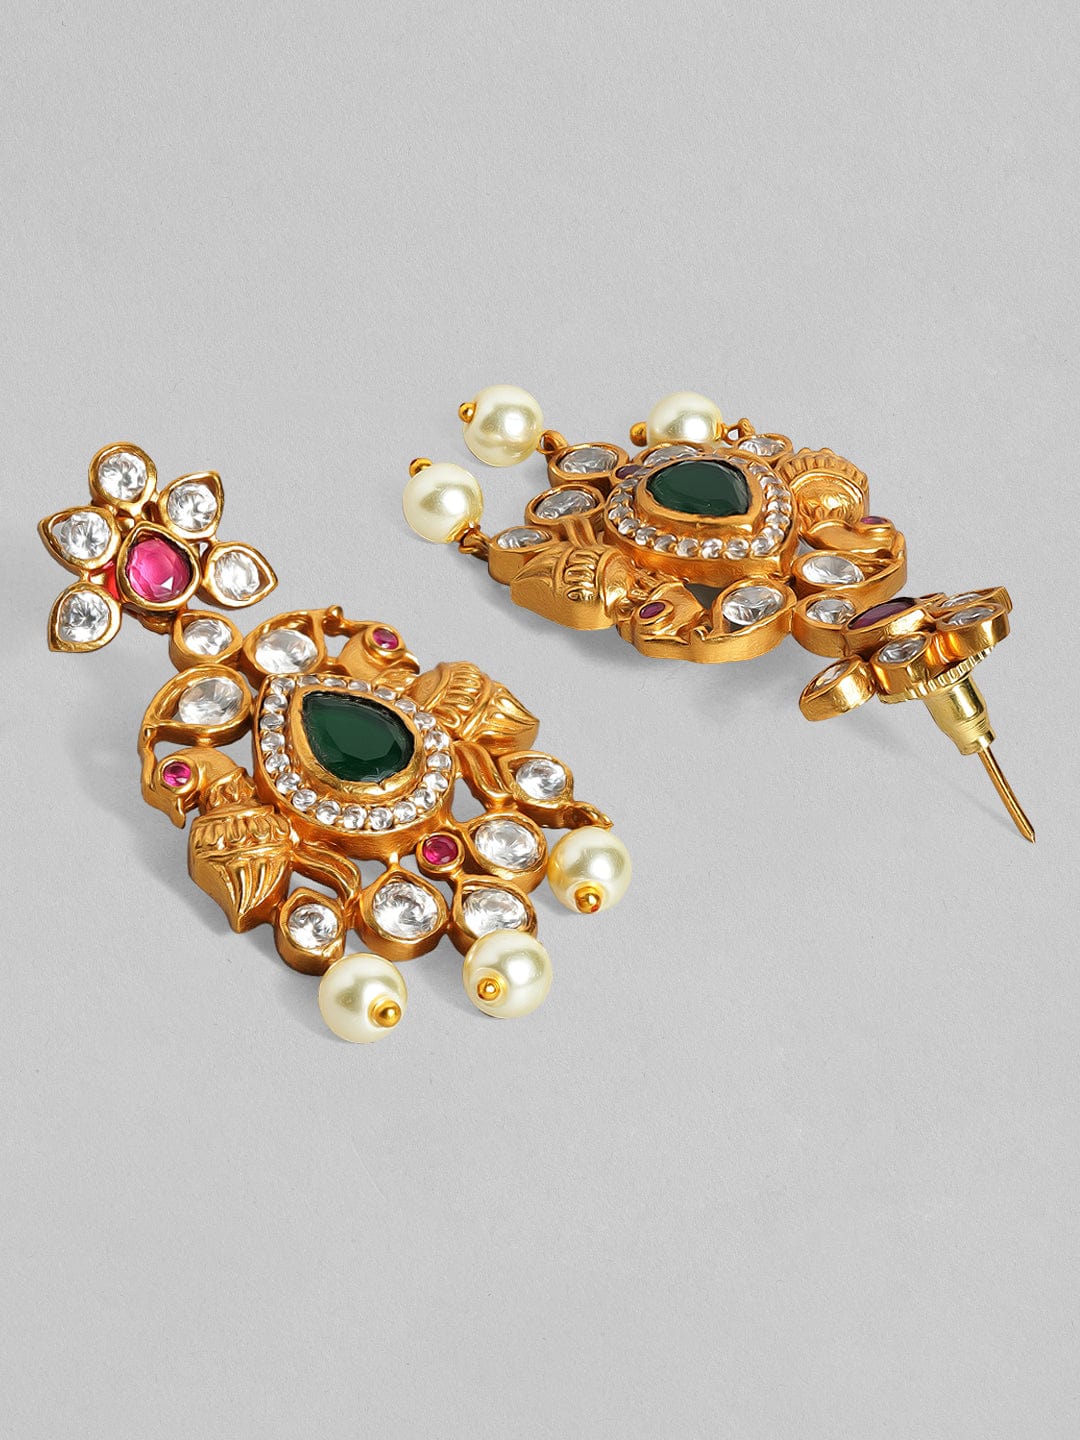 Rubans 22K Gold Plated Handcrafted Faux Ruby with White Pearls Drop Earrings Earrings